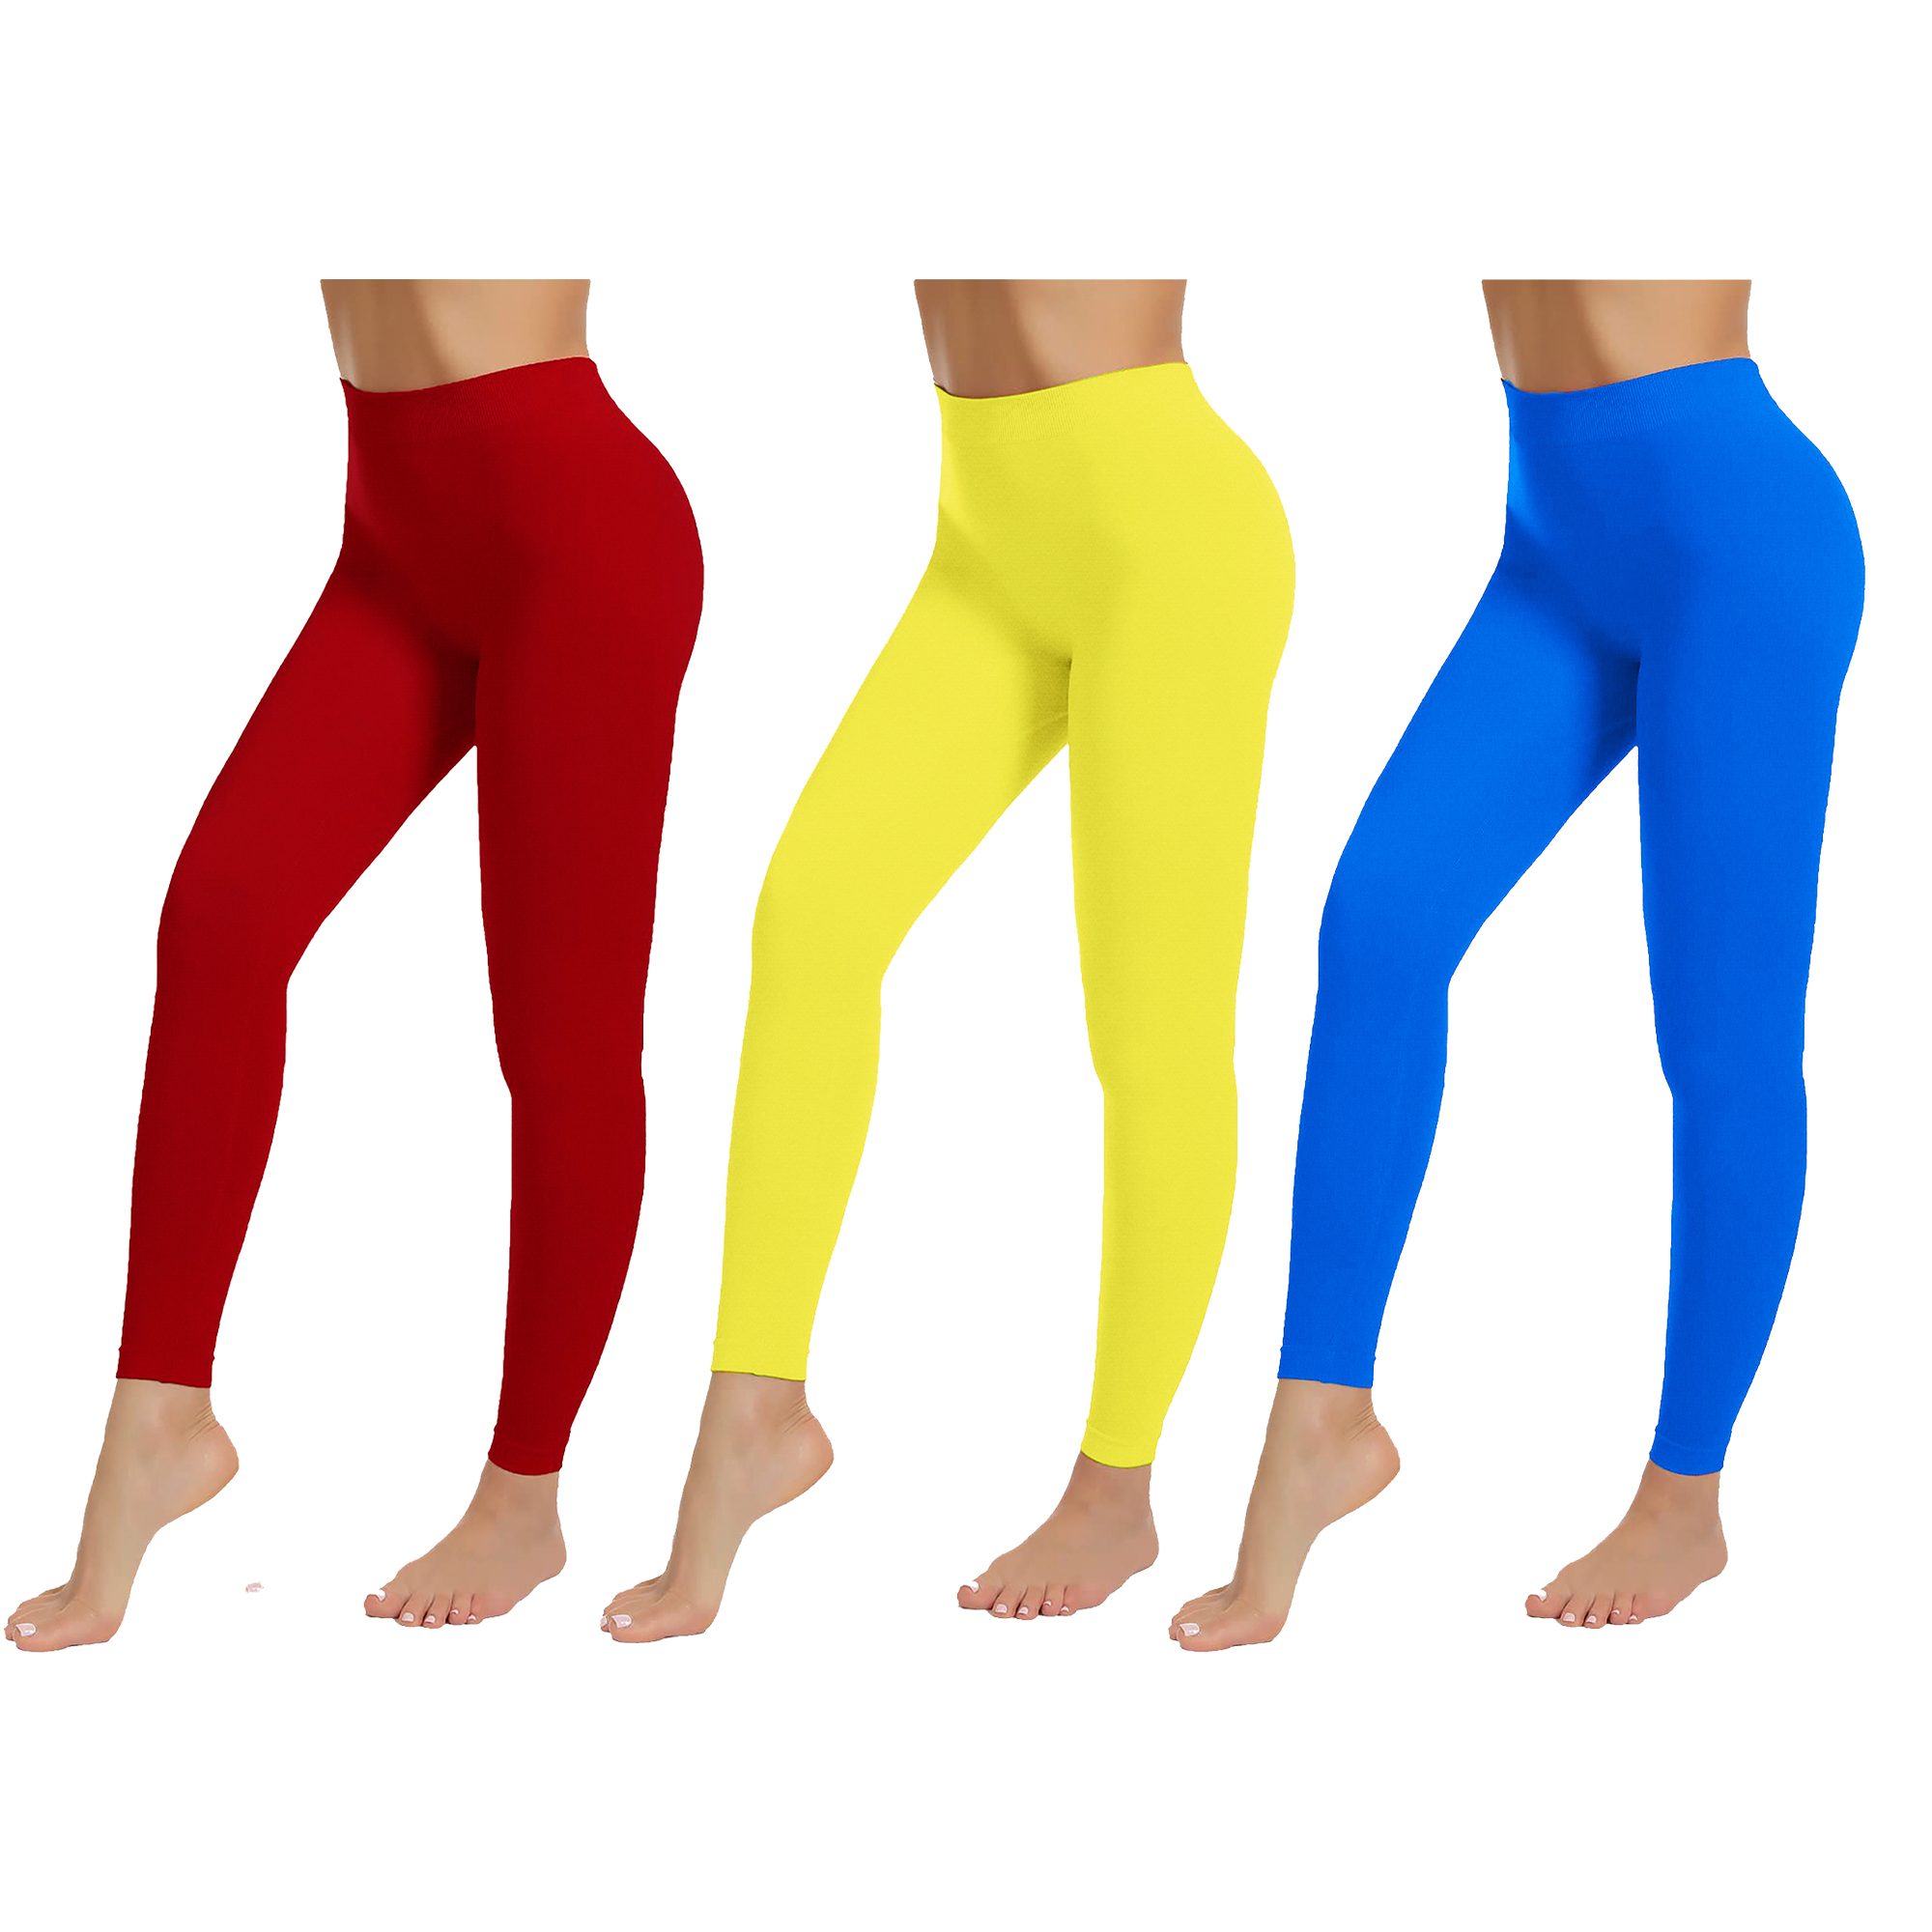 3-Pack: Women's High-Waist Ultra-Soft Stretchy Solid Fitness Yoga Leggings Pants - BLUE, XL